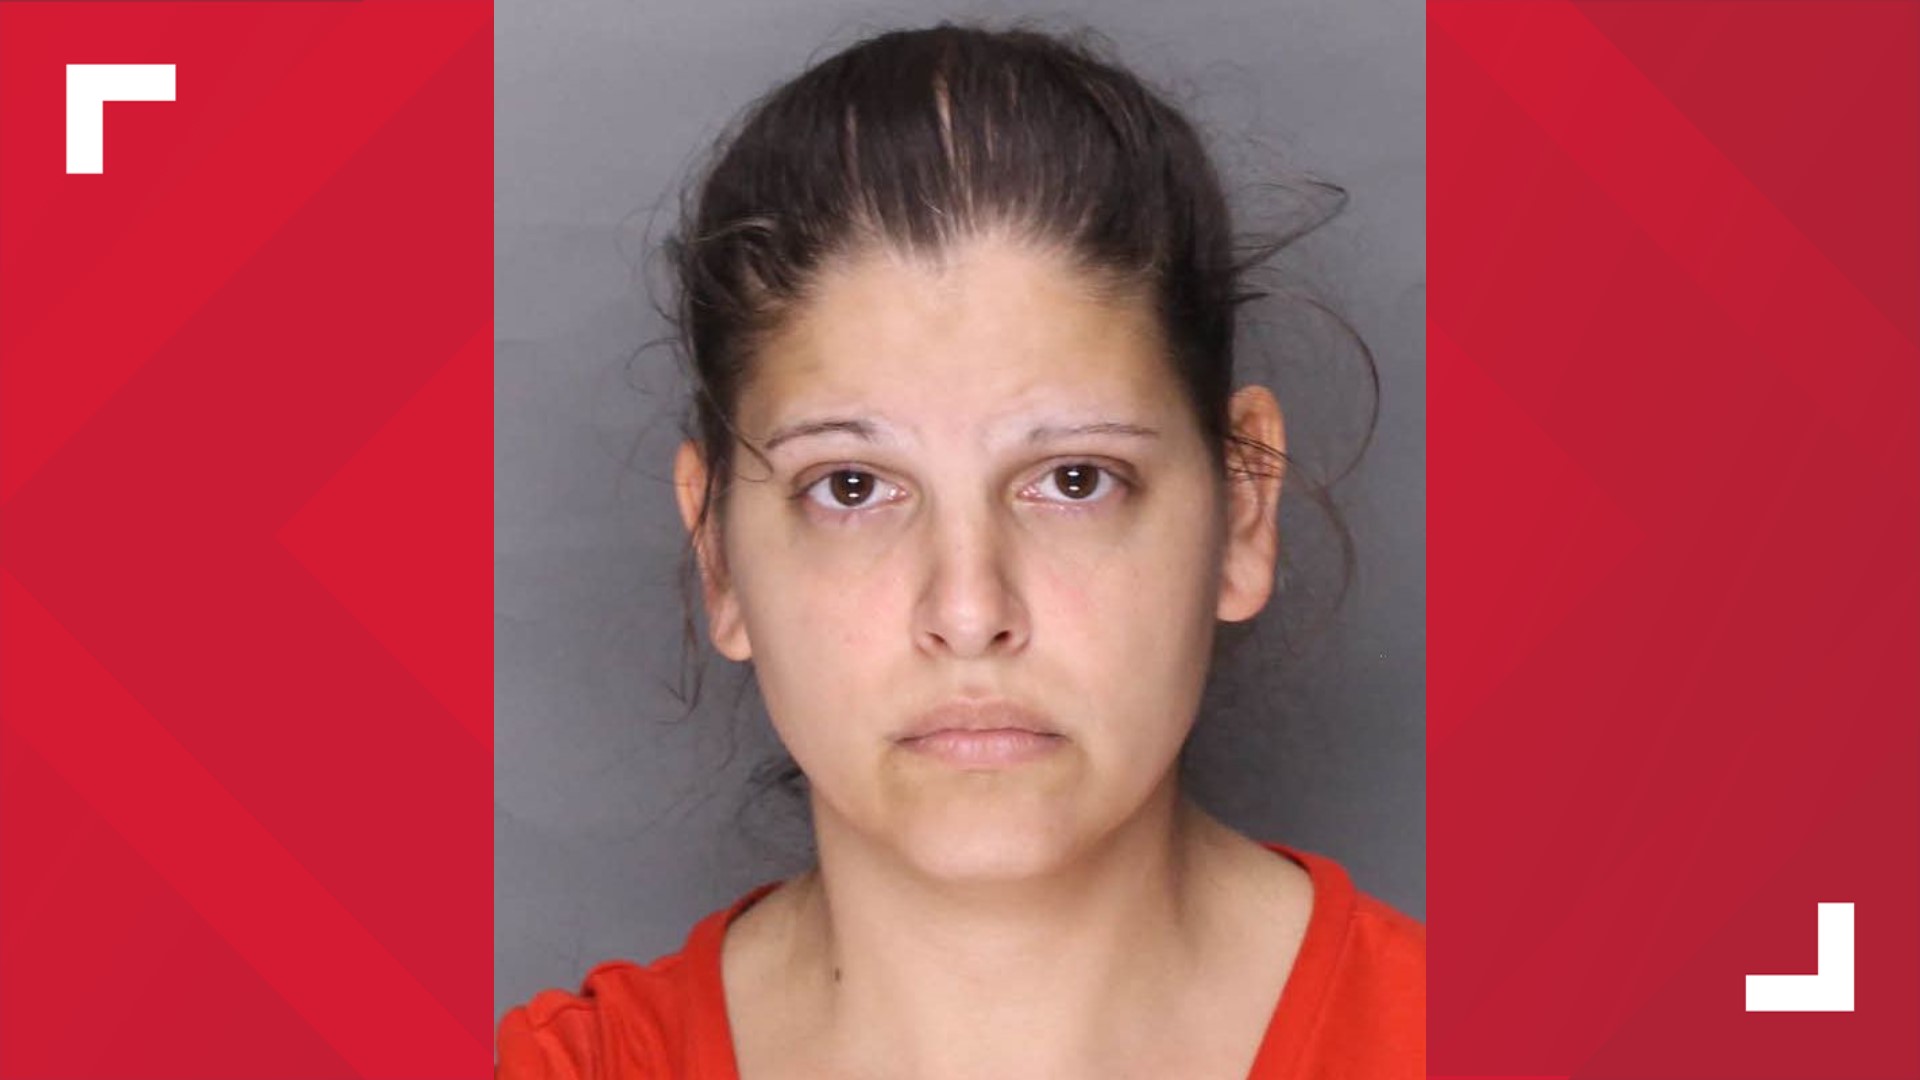 Kimberly Maurer, 36, is facing homicide and child endangerment charges in the trial that begins today.